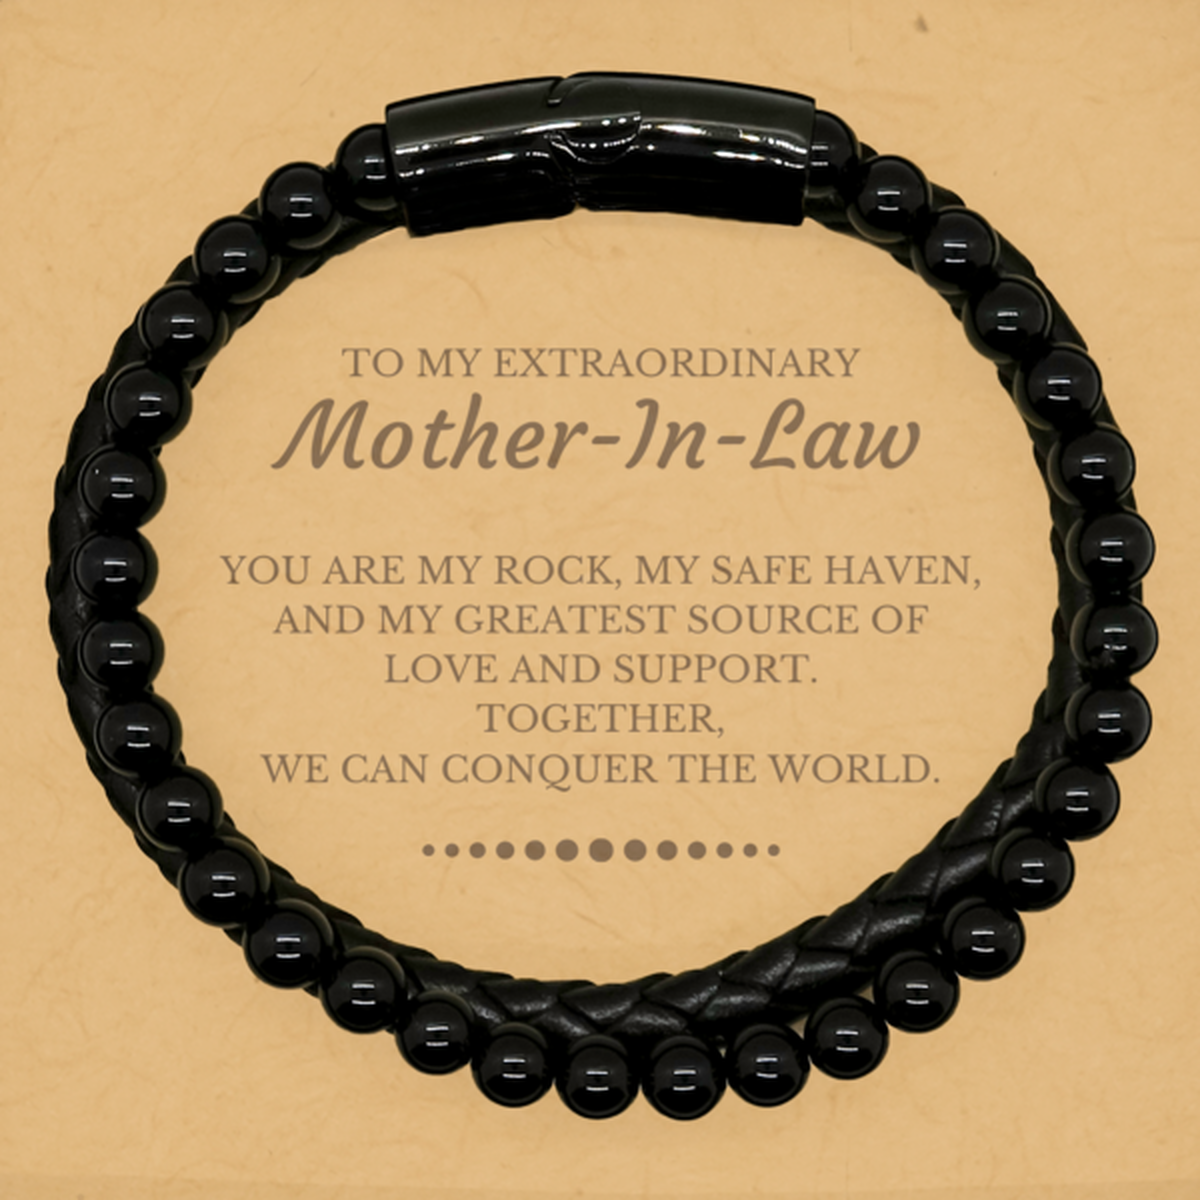 To My Extraordinary Mother-In-Law Gifts, Together, we can conquer the world, Birthday Stone Leather Bracelets For Mother-In-Law, Christmas Gifts For Mother-In-Law